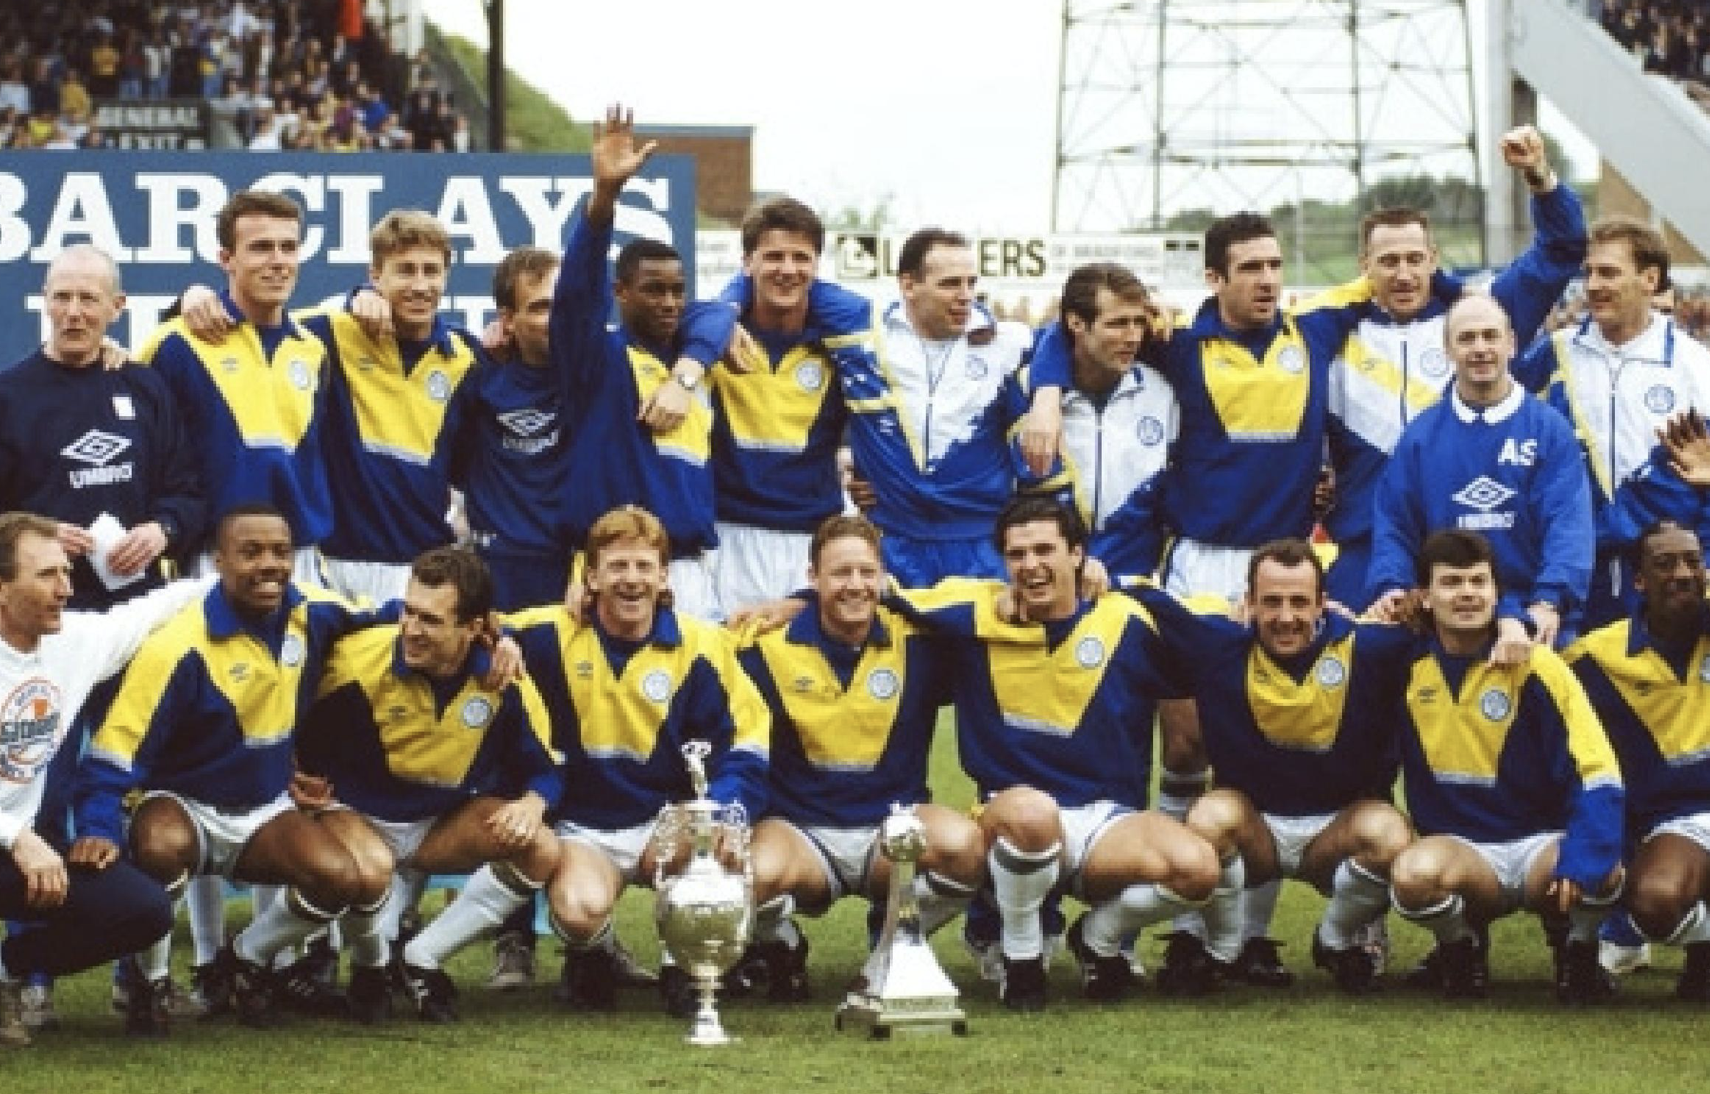 Leeds United's 1992 title winning squad to reunite at Scarbrough Spa